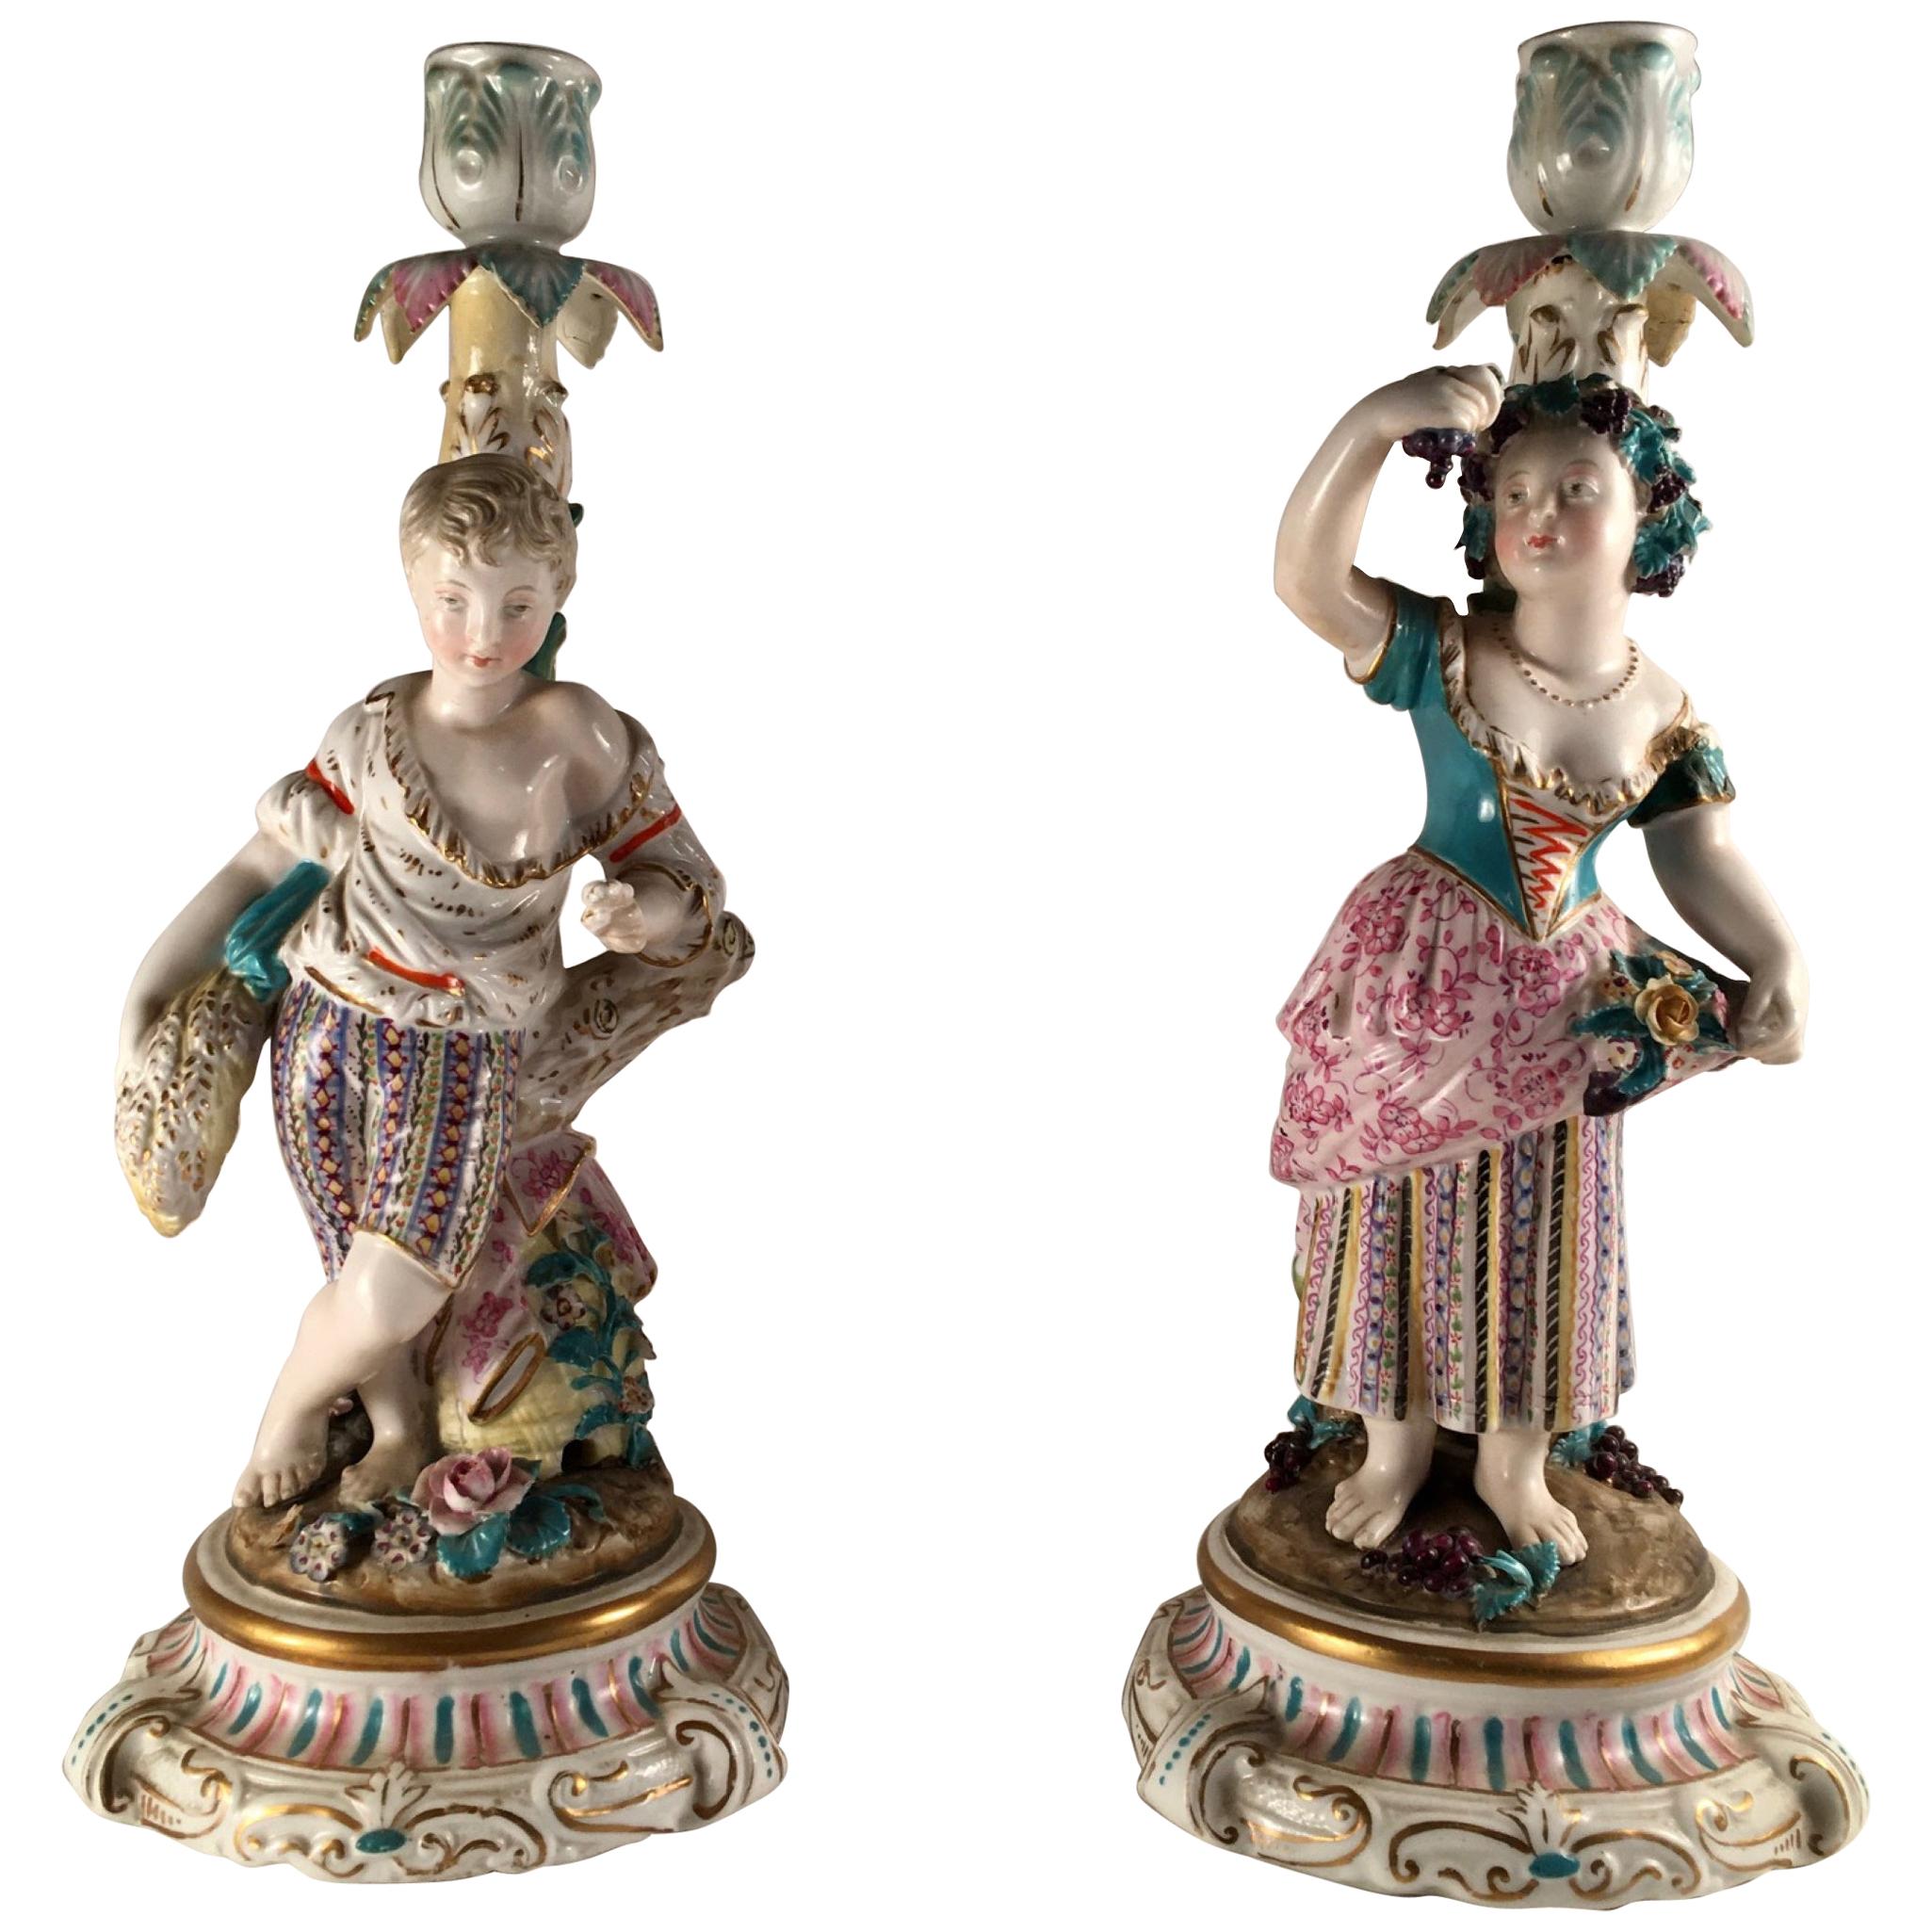 Pair of Porcelain Rococo Style Figural Candlesticks, ca. 1850